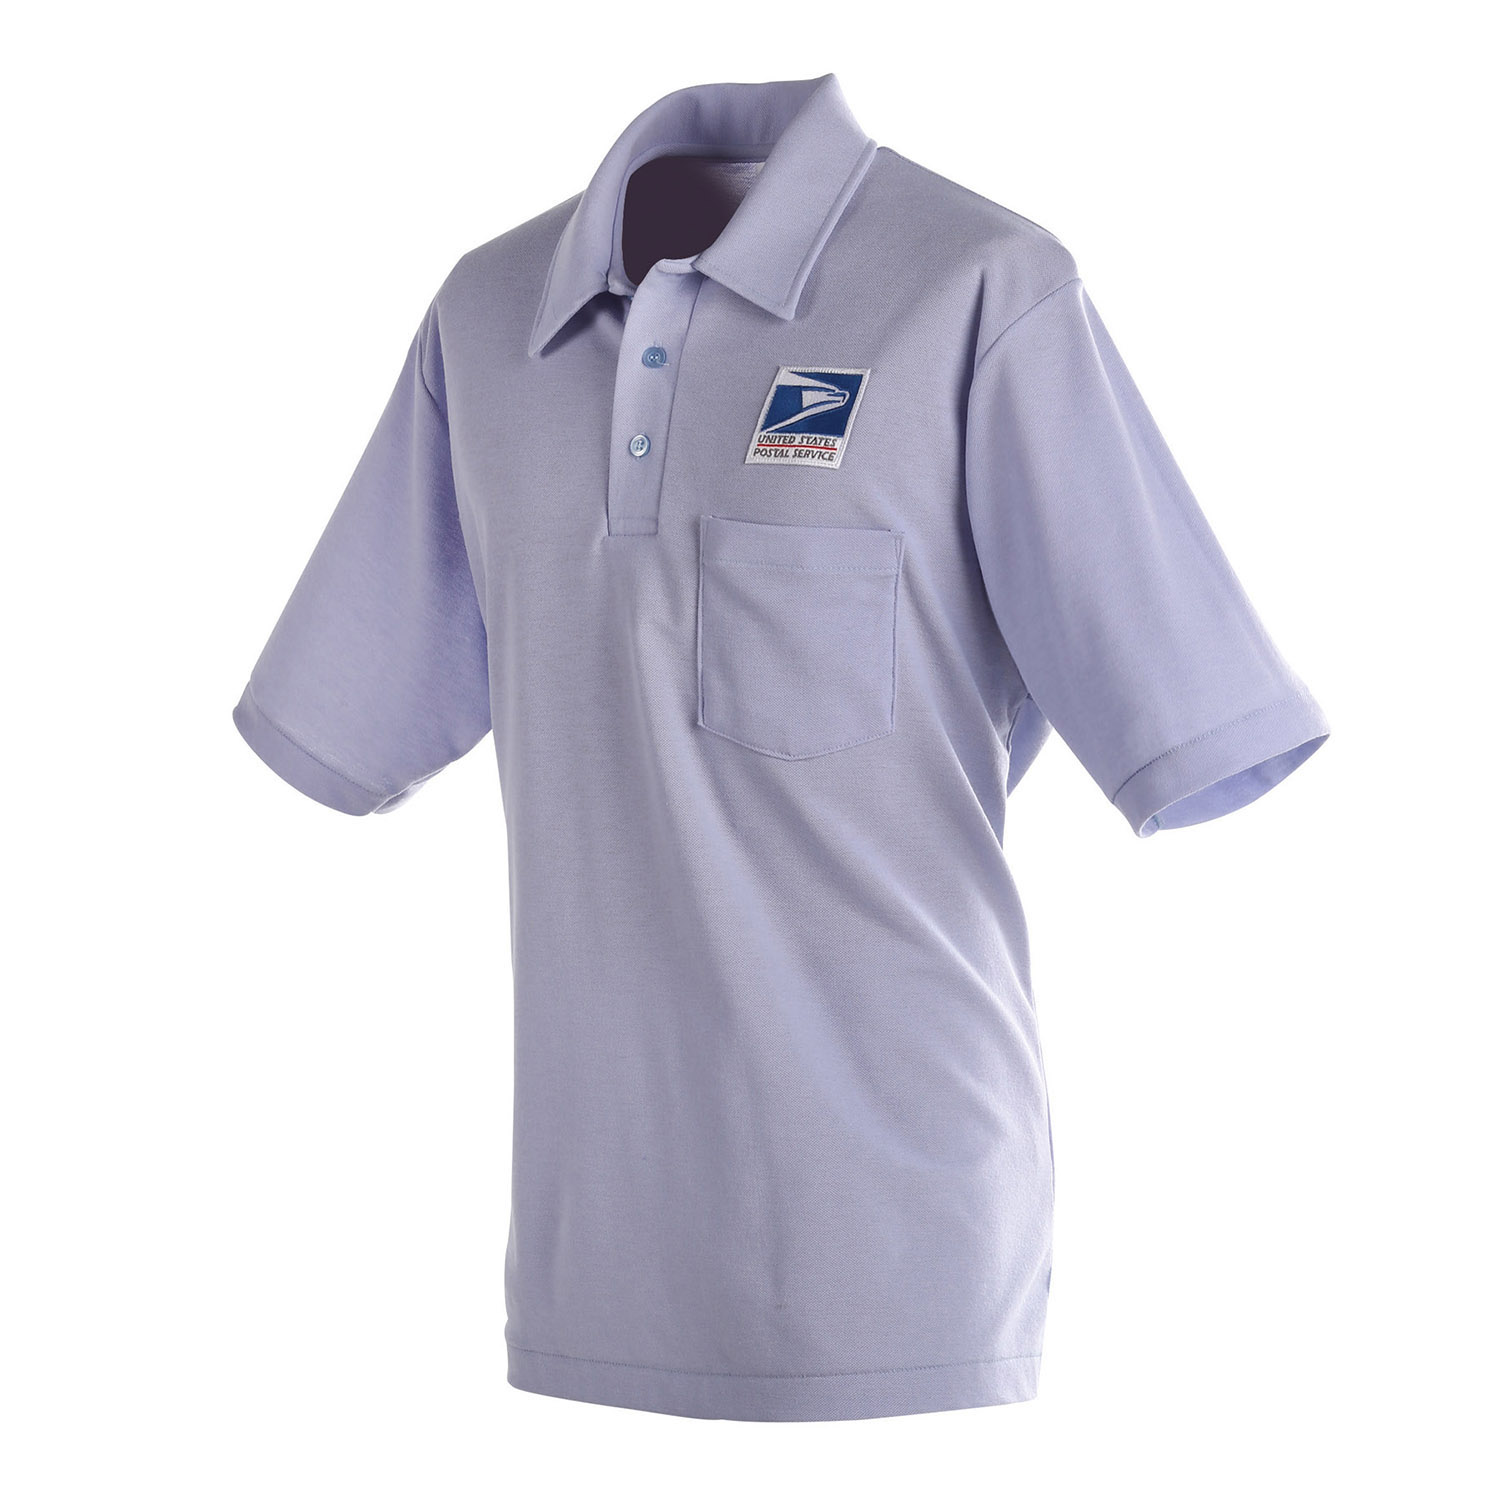 Mens Knit Polo Shirt for Letter Carriers and Motor Vehicle S